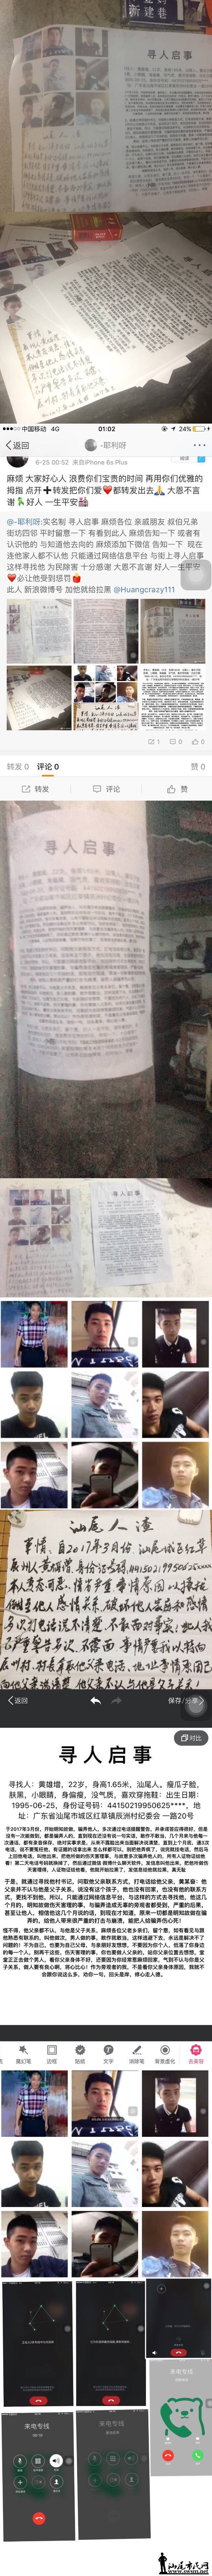 wechat_upload1499261068595ce88ceb33a